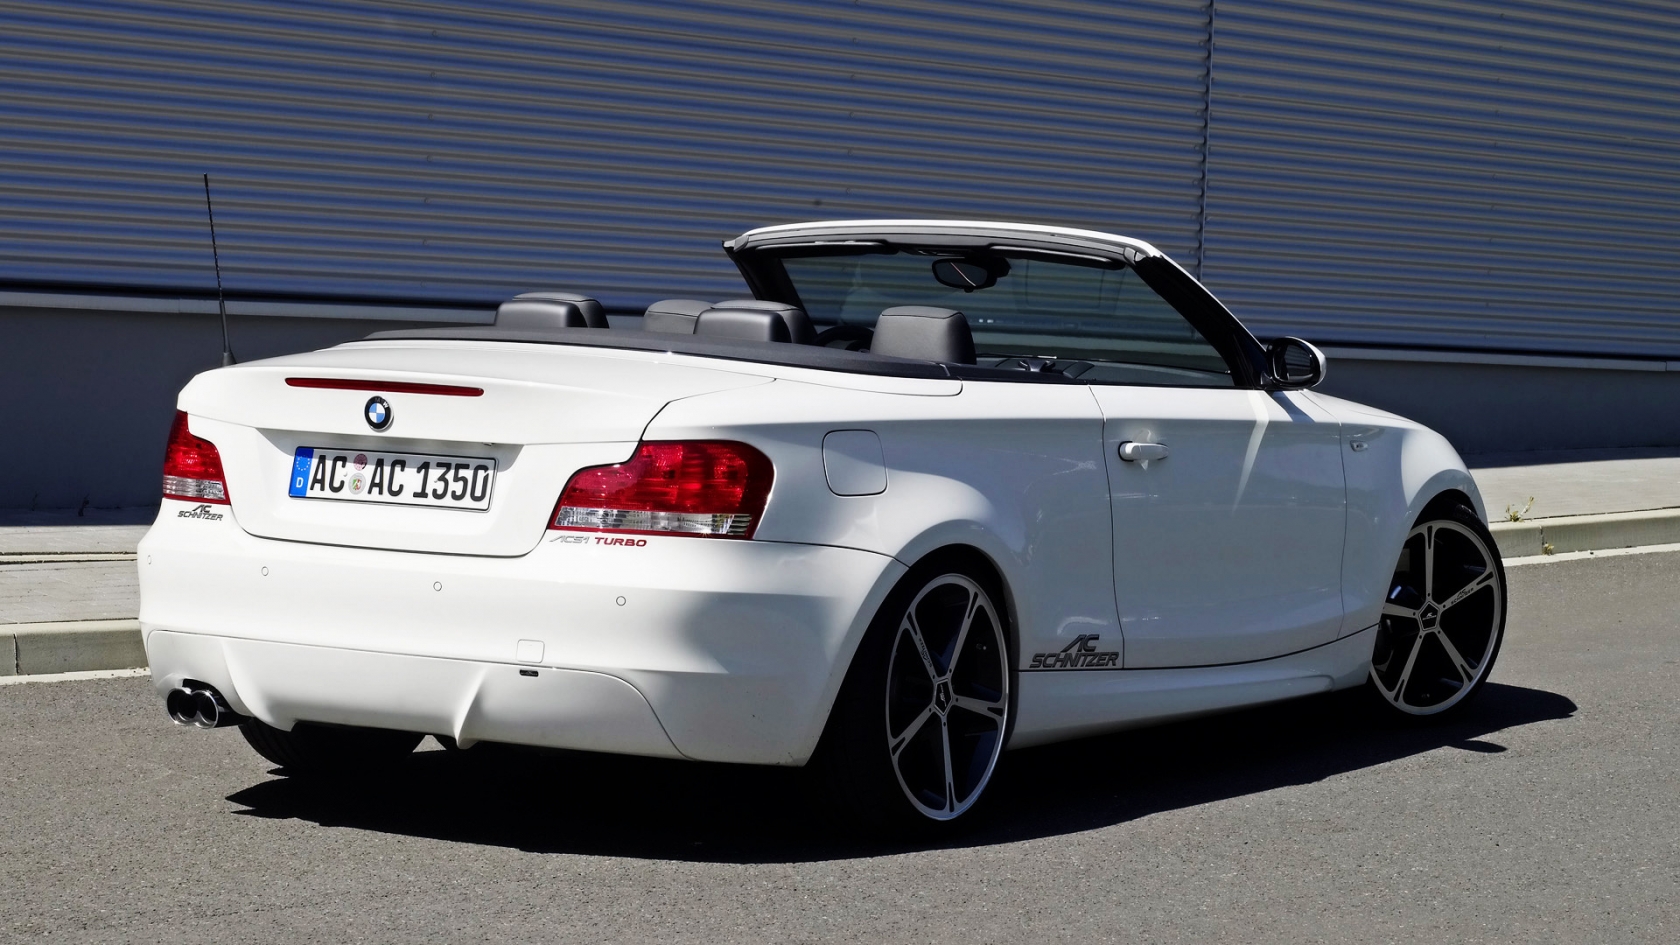 BMW 1 Series Convertible Rear Angle for 1680 x 945 HDTV resolution